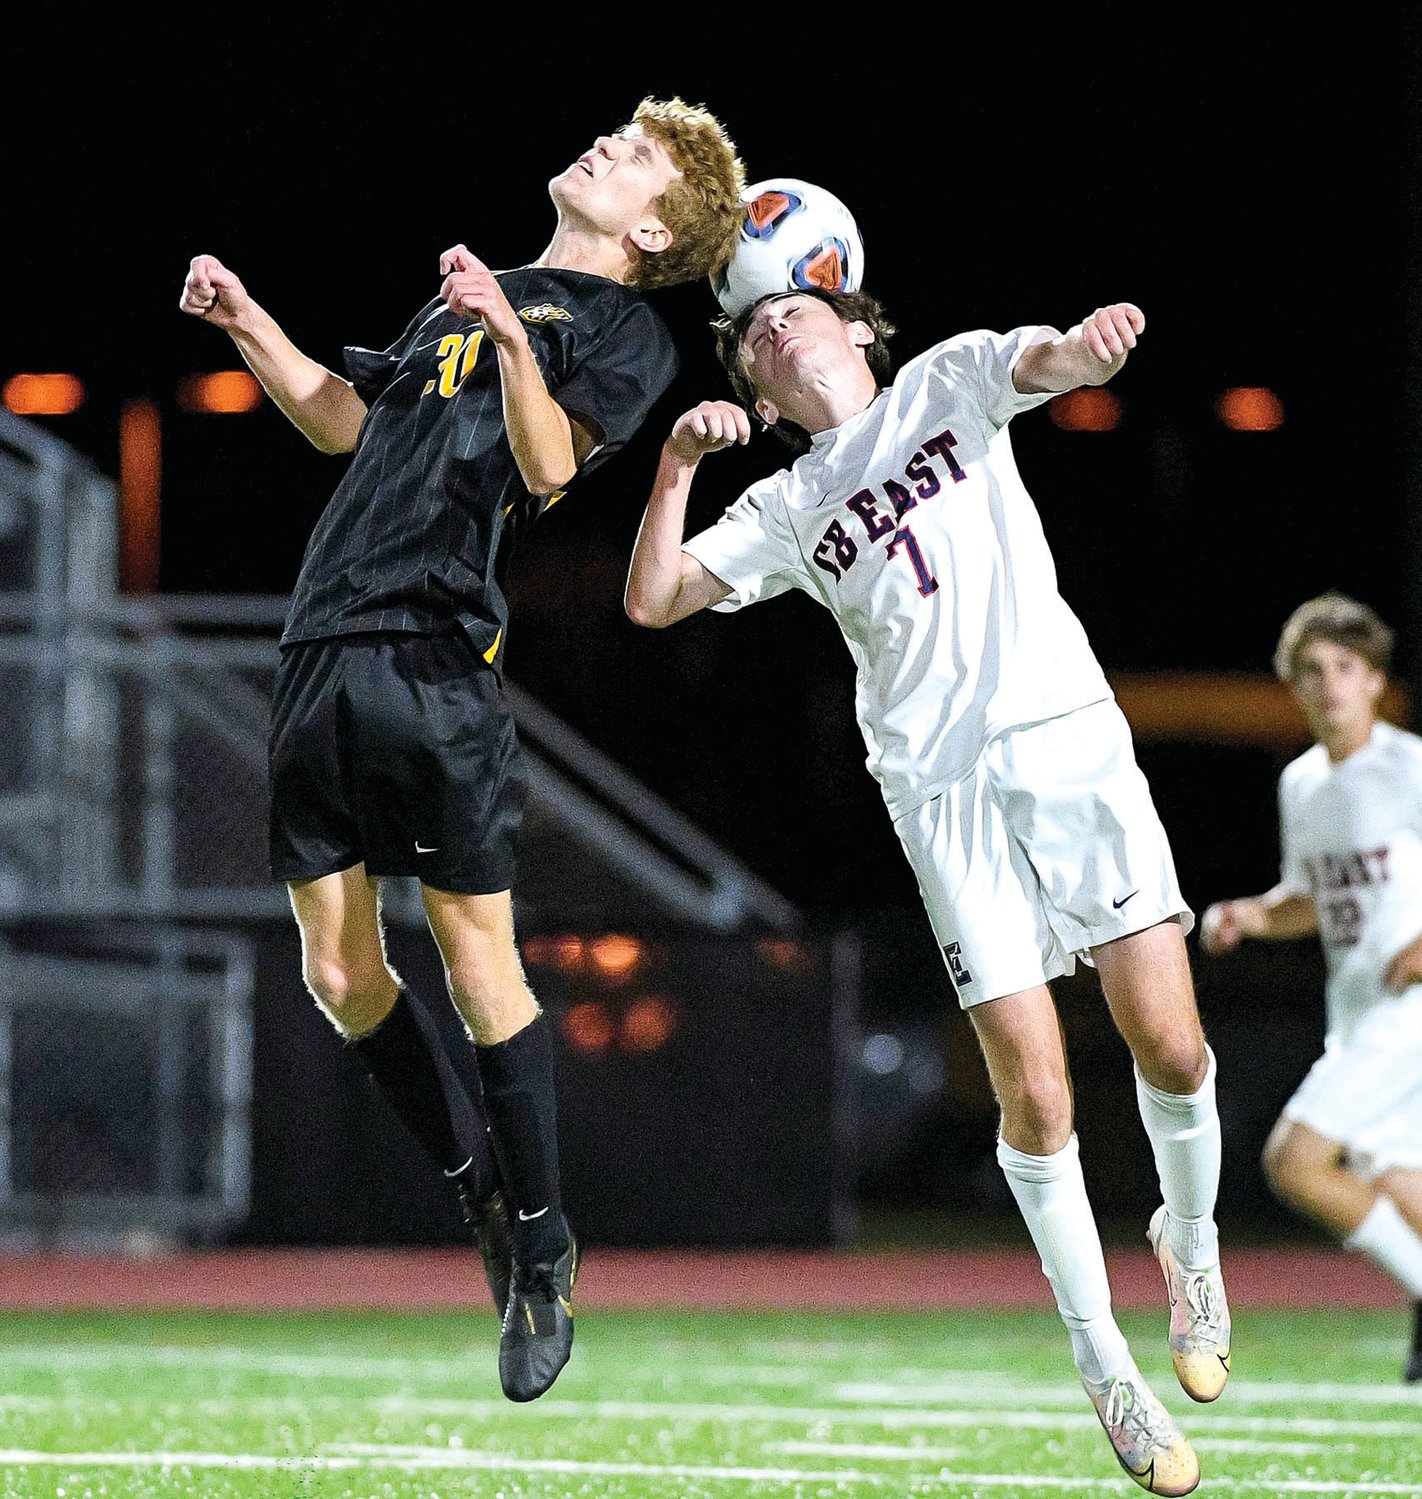 CB West’s Kyle Flaherty and CB East’s Cole Hedden go up for a header.